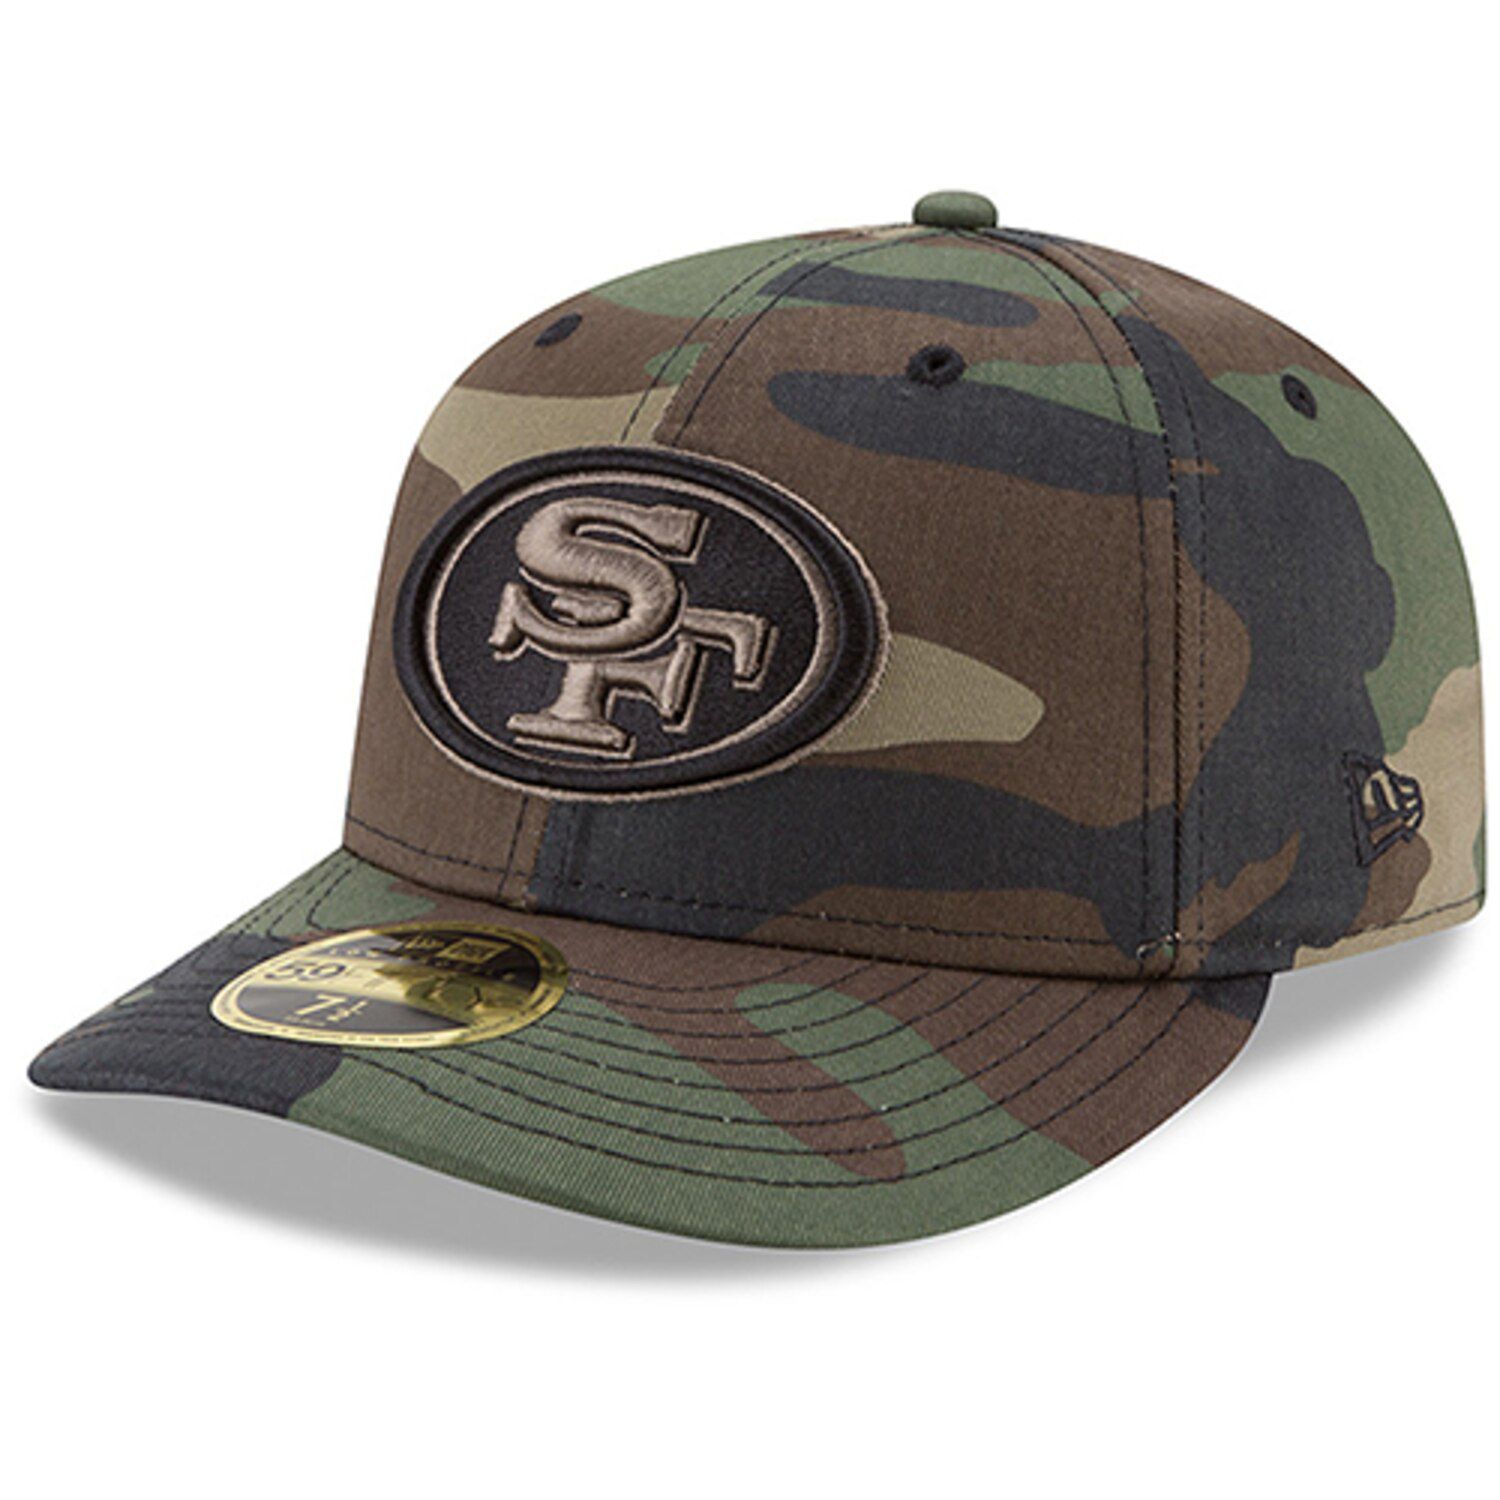 San Francisco 49ers fitted cap